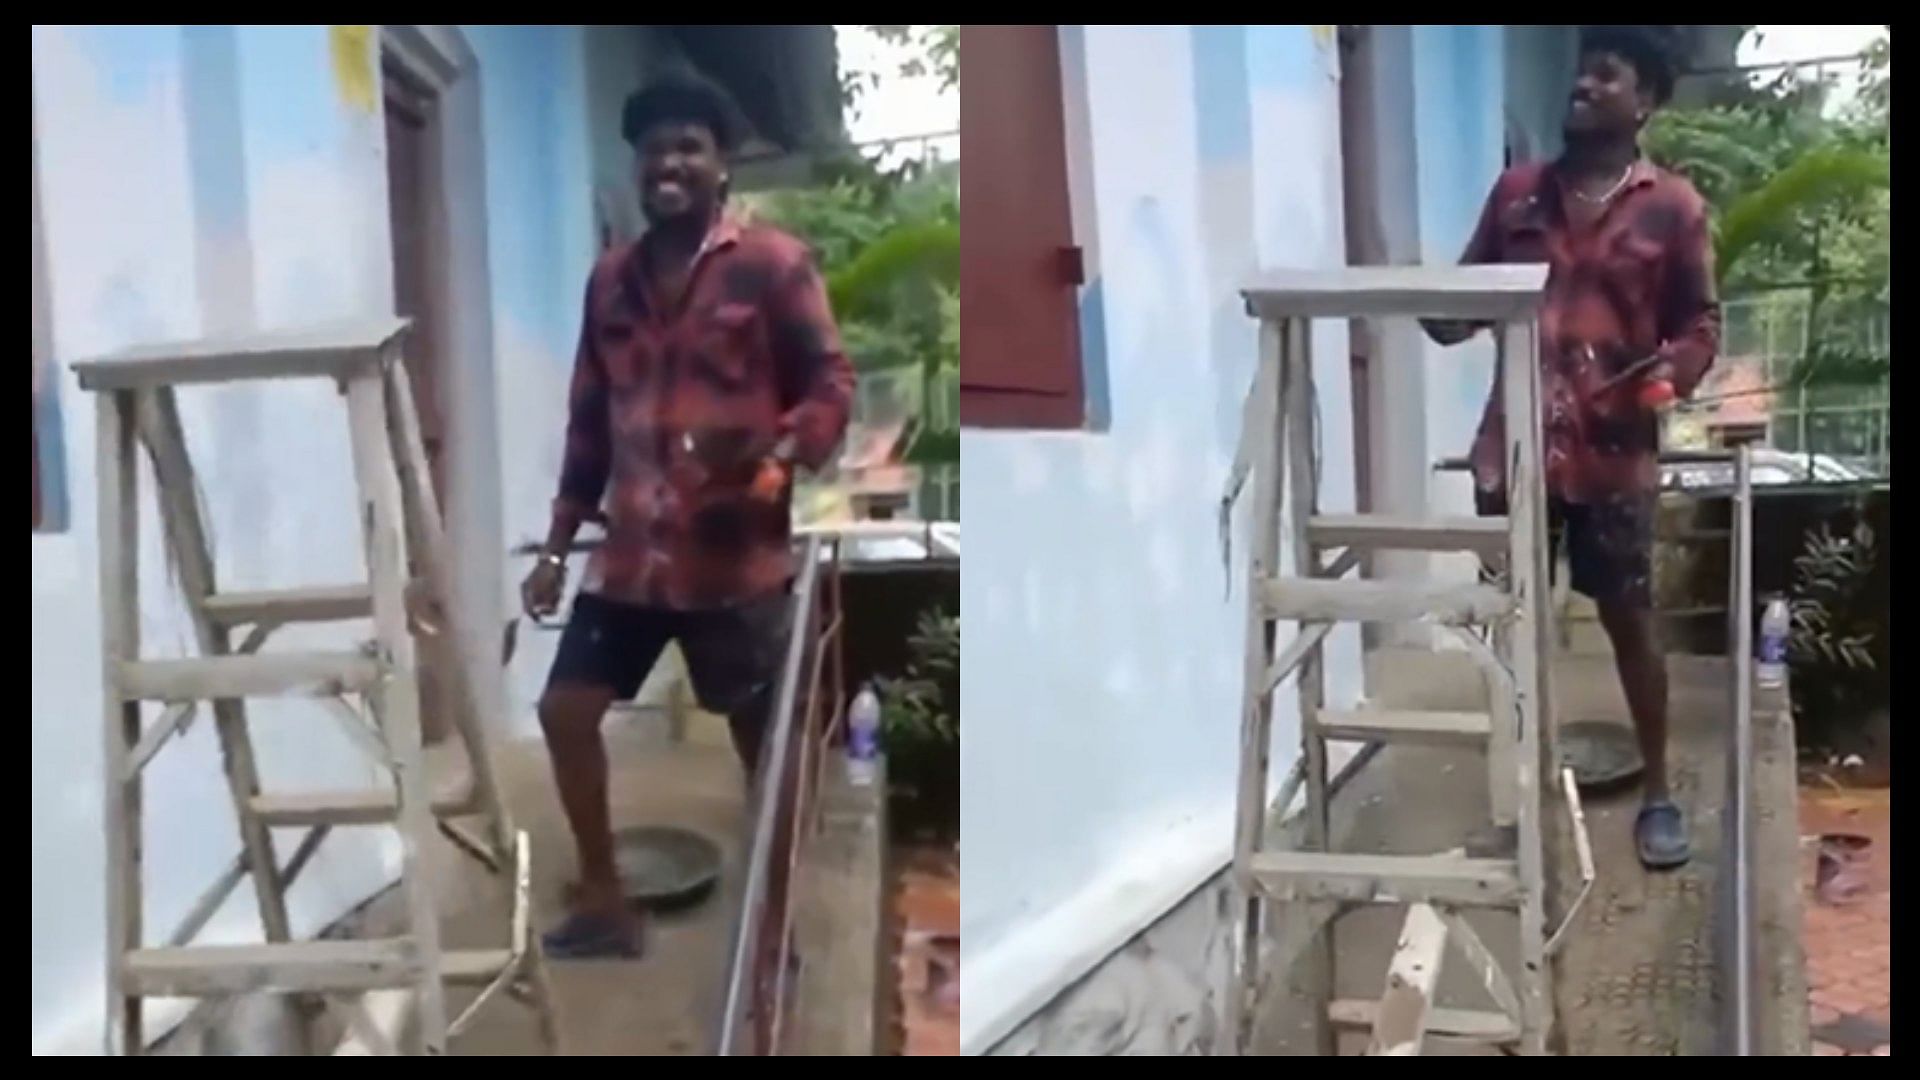 Ladder of the laborer who was painting the house started moving on its own funny video viral on social media